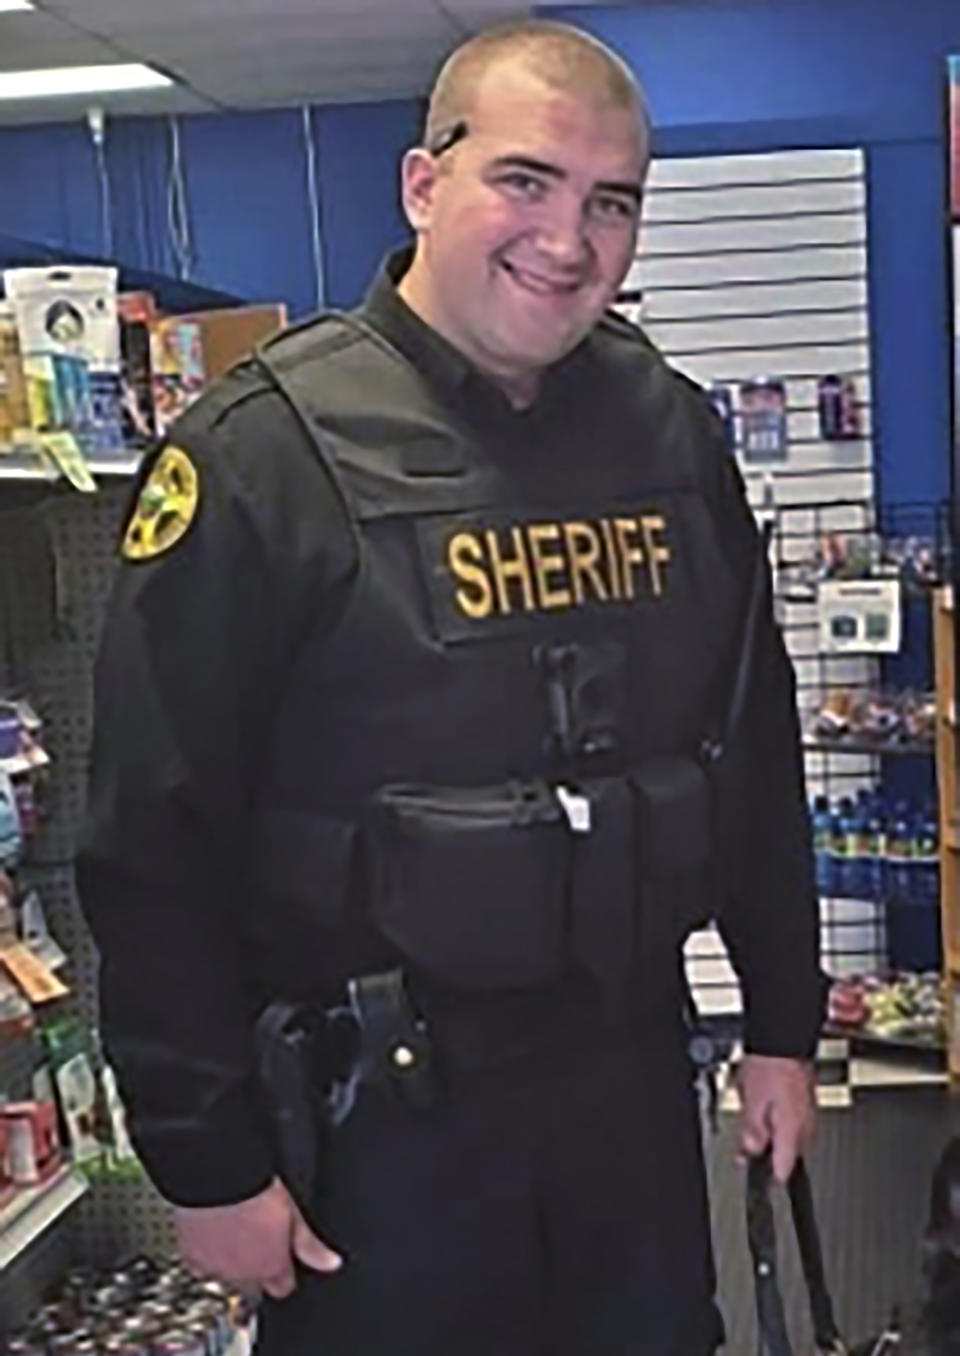 This image provided by the Watauga County Sheriff's Office shows officer K-9 Deputy Logan Fox who was killed while responding to a welfare check Wednesday, April 28, 2021, in Boone N.C. Two deputies were killed and three other people including a suspected gunman were found dead after a lengthy standoff in North Carolina, a sheriff's office said Thursday. (Watauga County Sheriff's Office via AP)